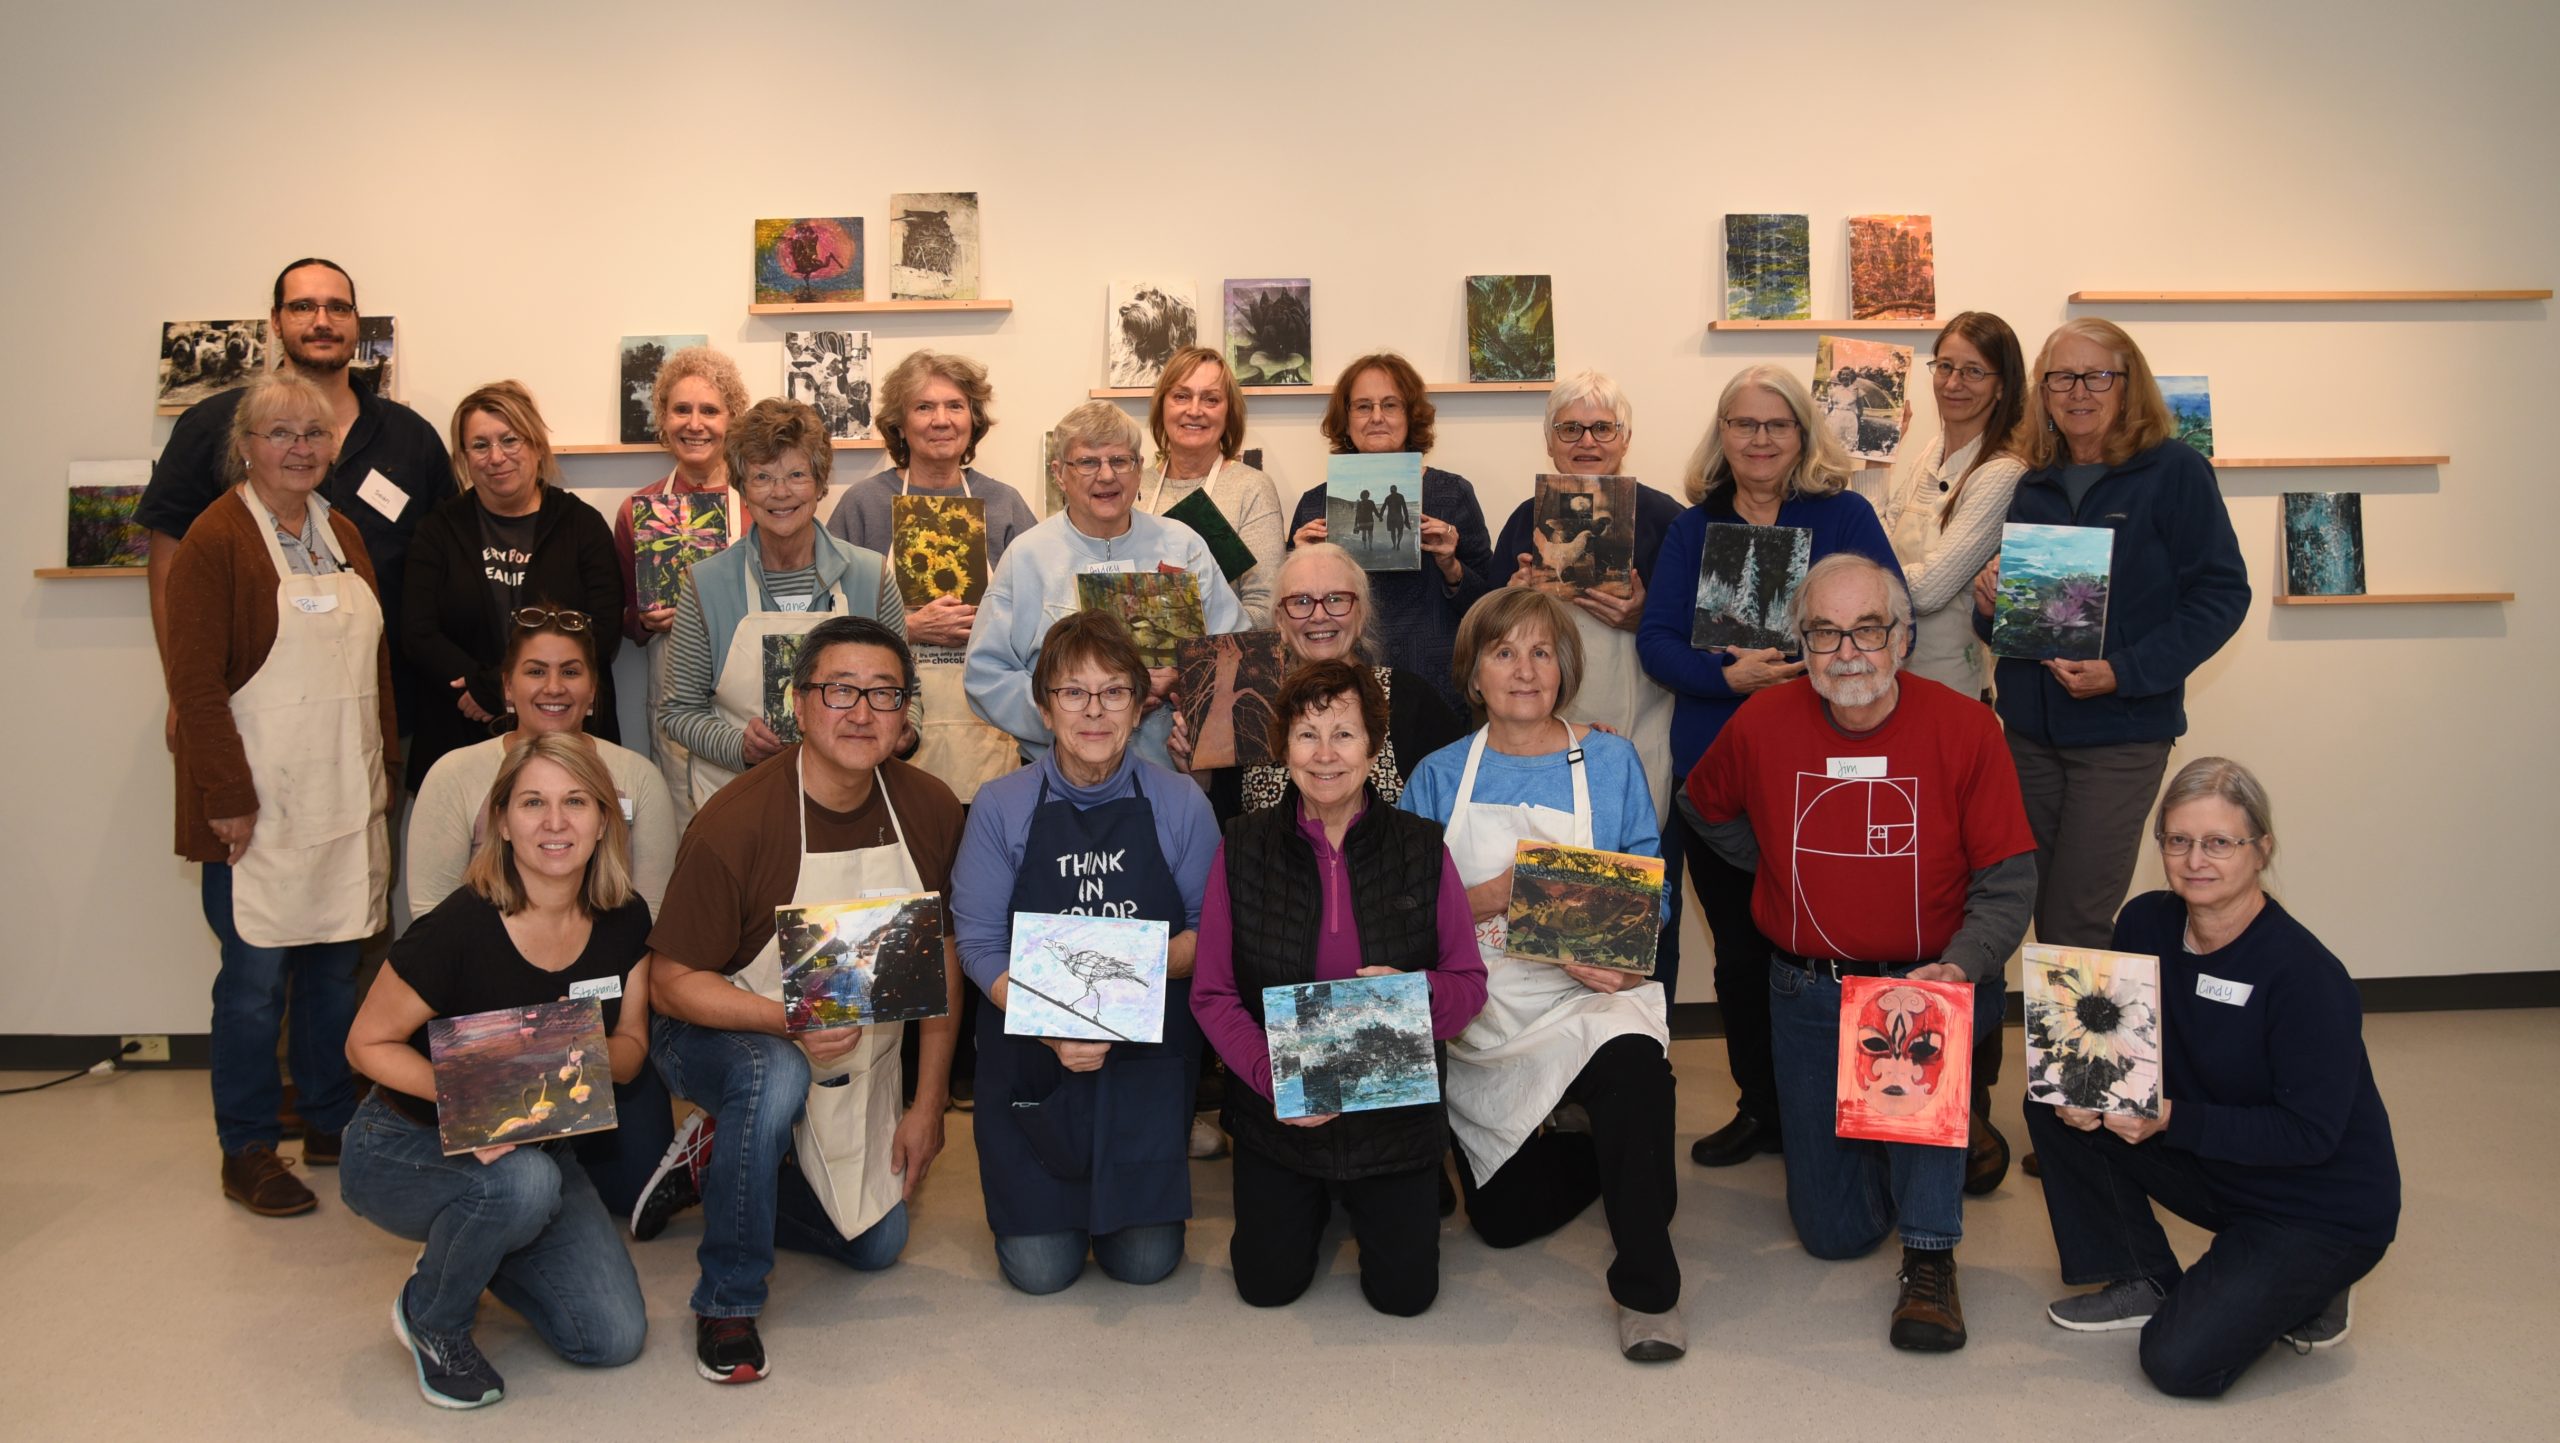 A group photo shows workshop participants with their mixed-media creations